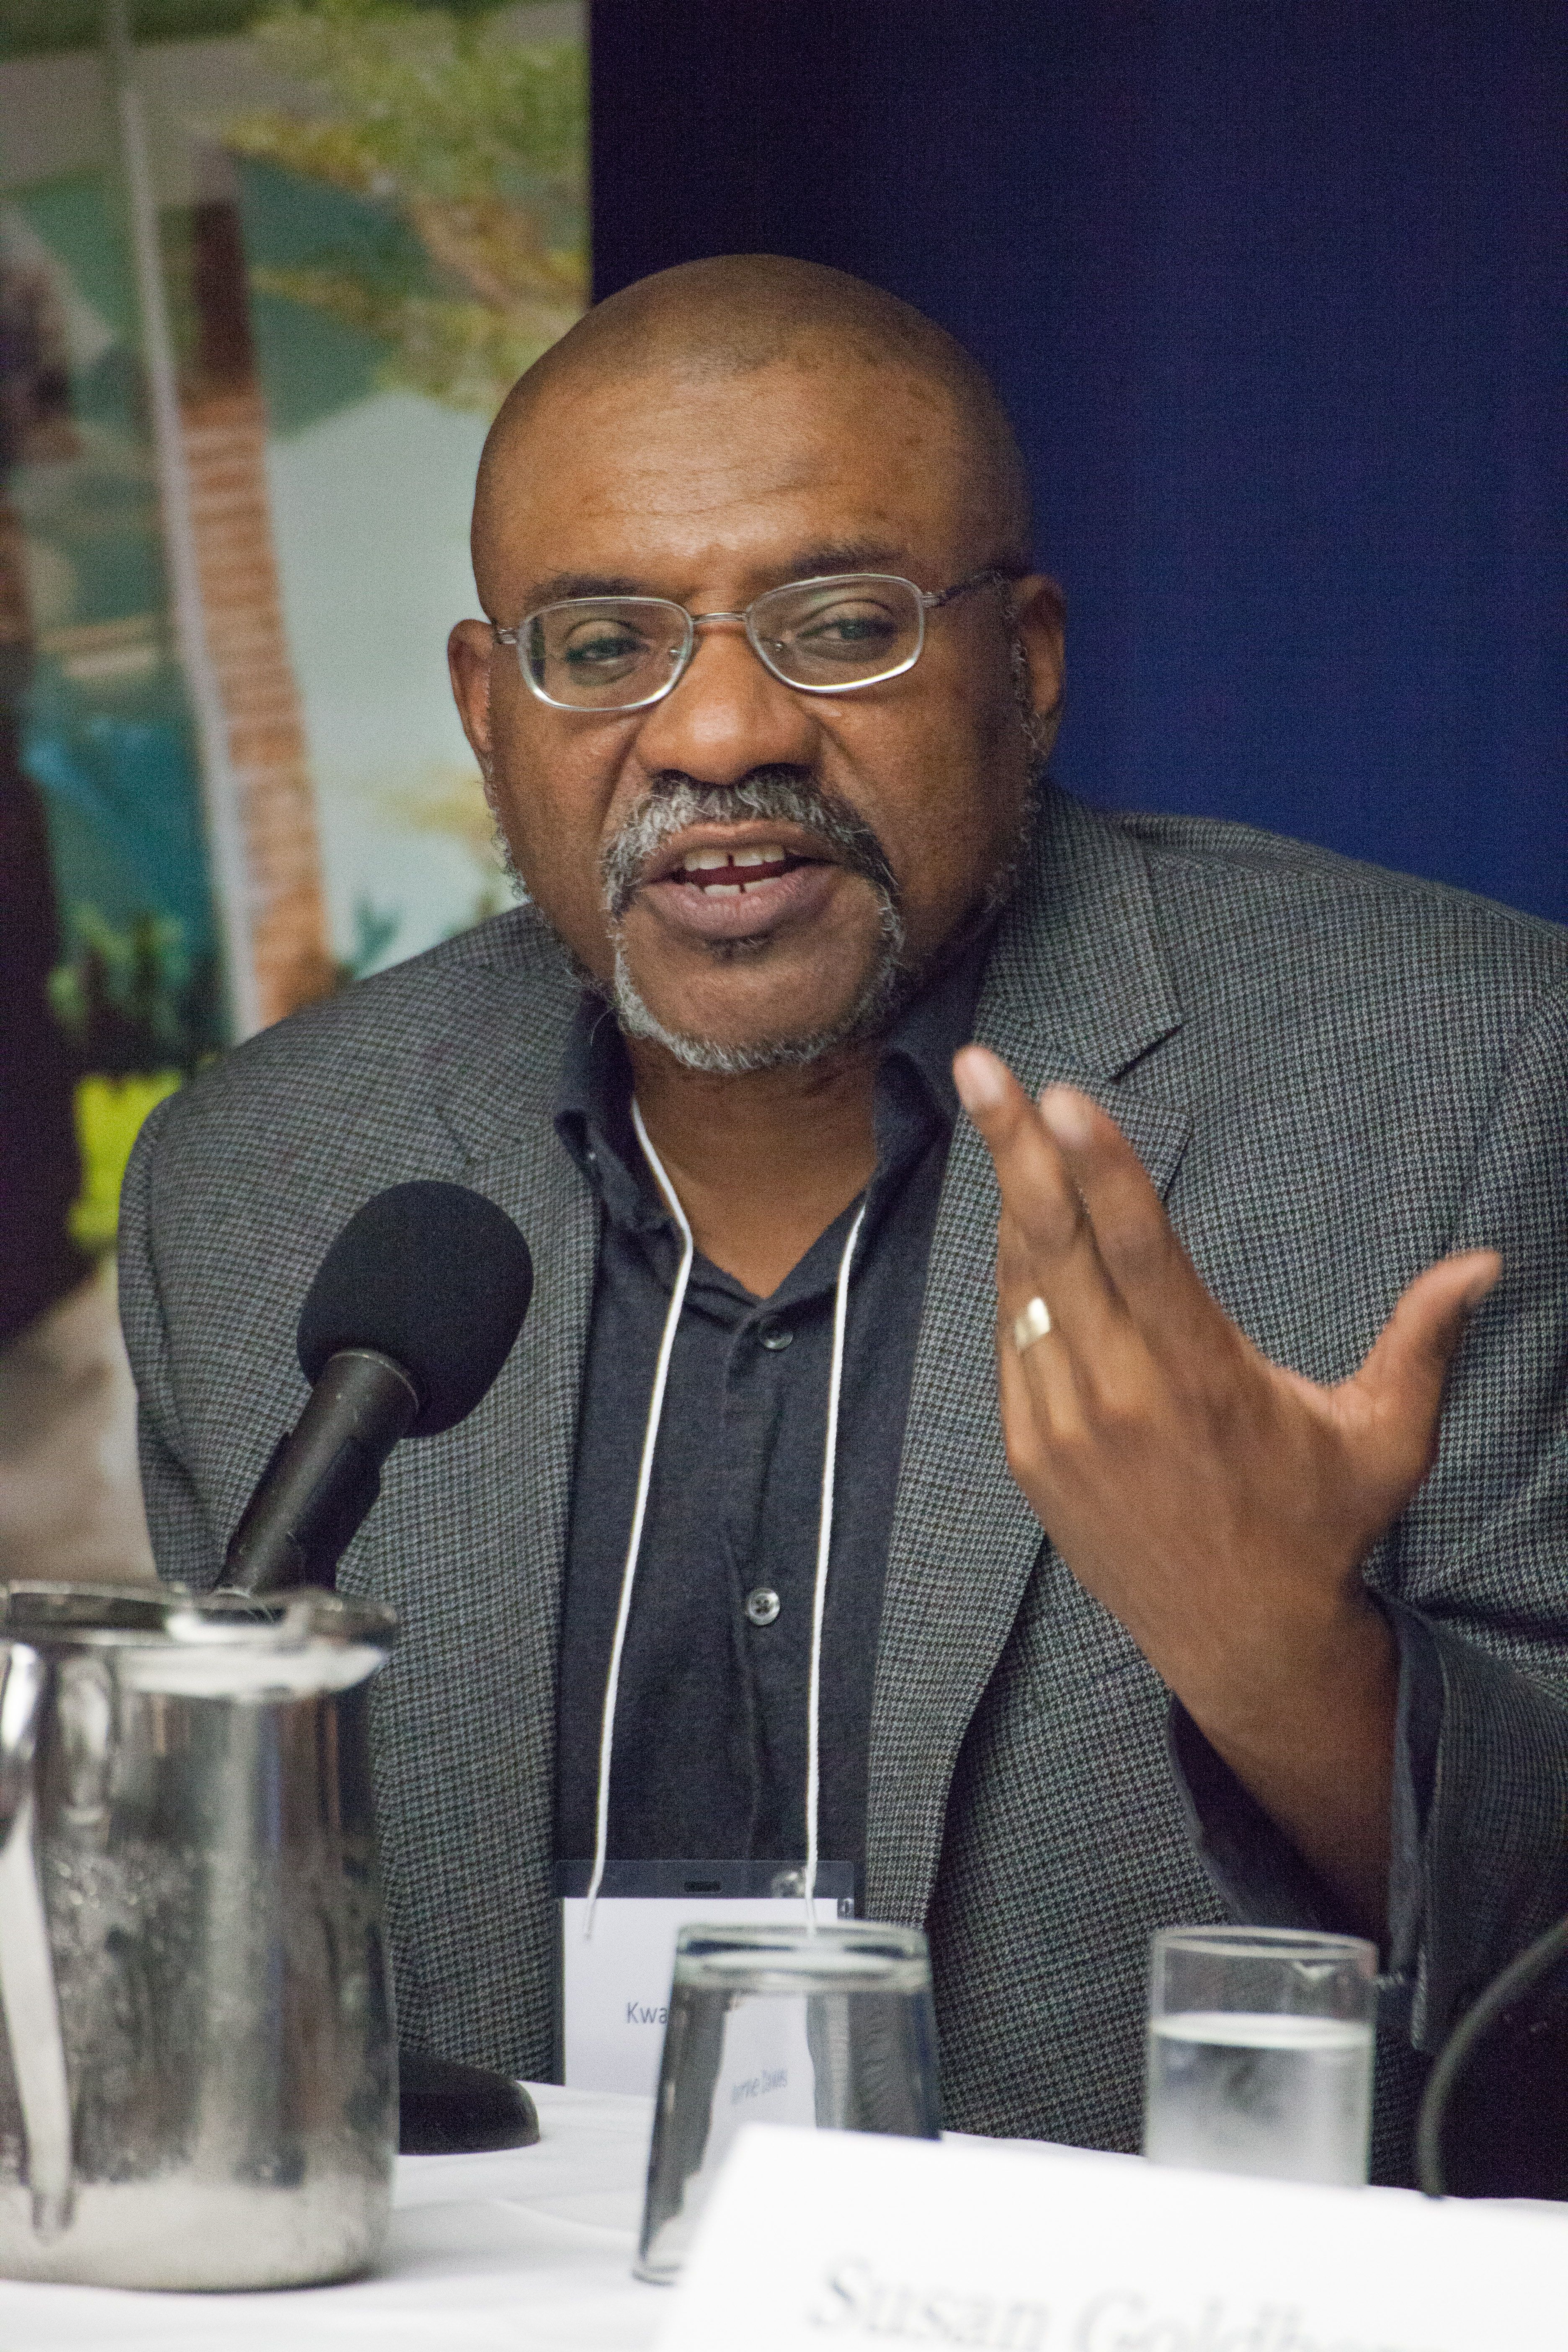 Kwame Dawes presents his work as a poet and writer within the context of his Pulitzer Center grant, at the Diversifying the Story panel at Pulitzer Center Gender Lens Conference. Image by Sydney Combs. United States, 2017. 